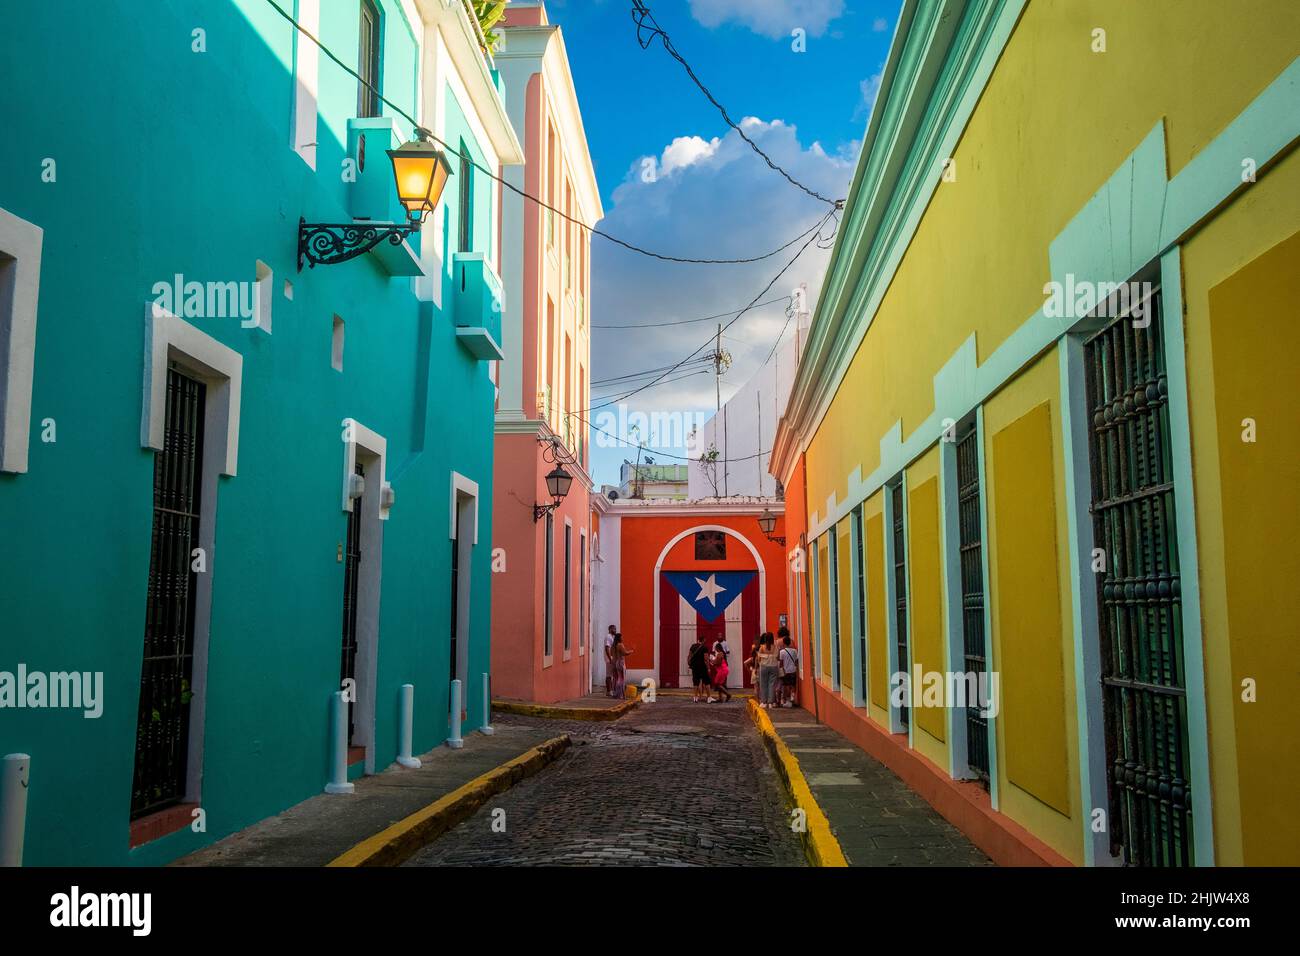 Tourists next to a mural of the Puerto Rican flag in a street full of colorful houses, Old San Juan, Puerto Rico Stock Photo